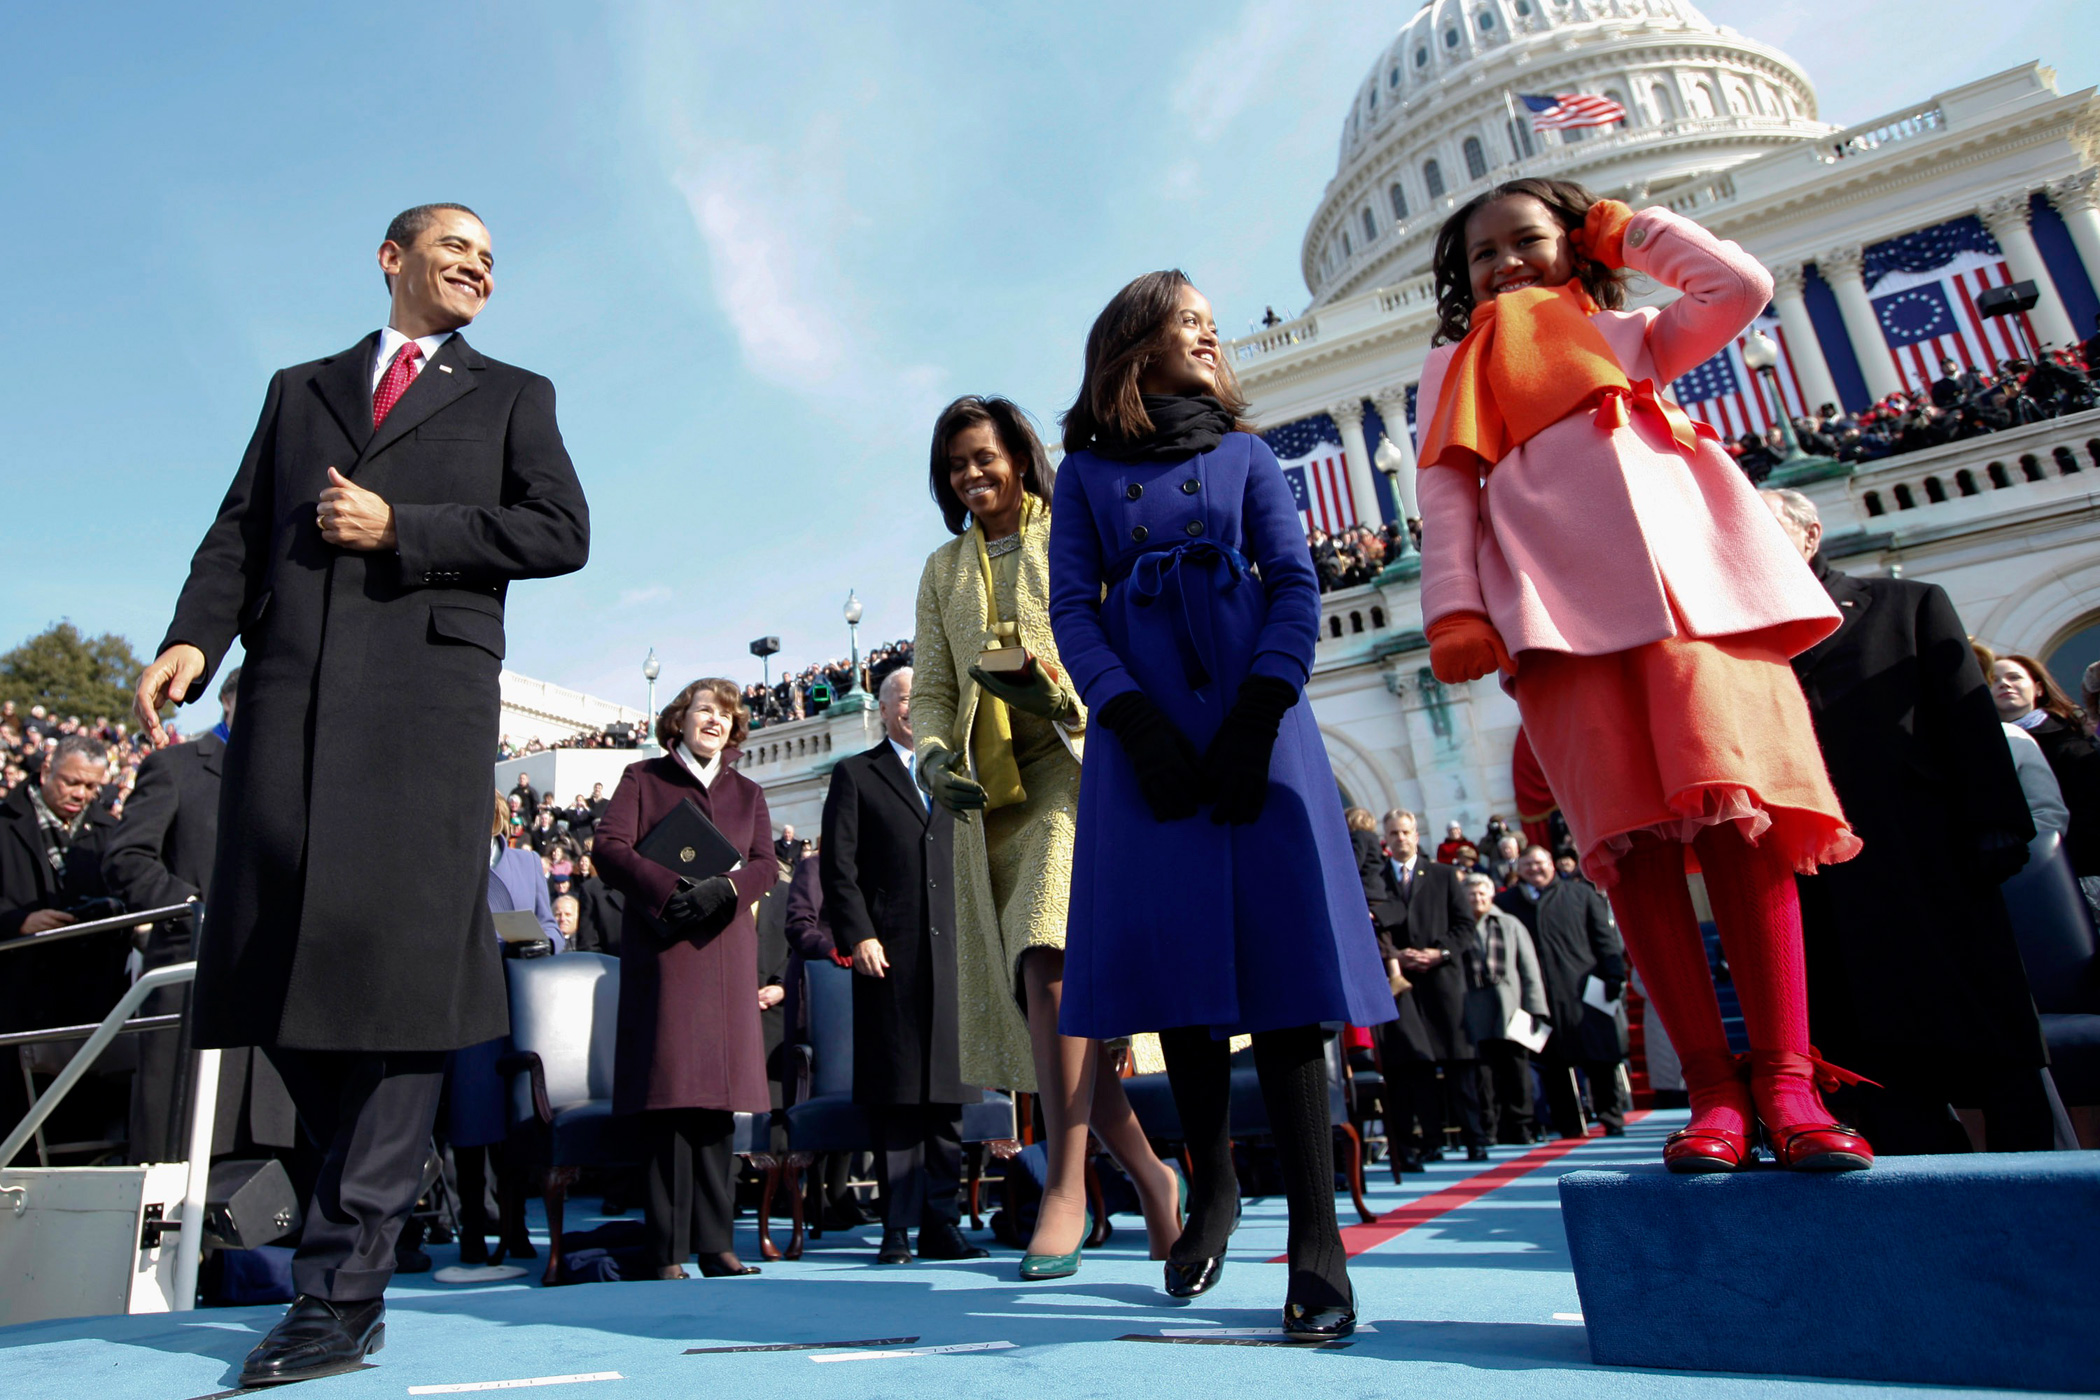 Malia Obama is graduating from the private Sidwell Friends School on Friday, growing up in the public eye of the White House. Jan. 20, 2009 Then President-elect Barack Obama, his wife Michelle and daughters Sasha, right and Malia, on the podium moments before Obama was sworn in as the 44th president at the U.S. Capitol in Washington. Malia, 10, wore a double-breasted periwinkle-blue coat with a blue-ribbon bow at the waist from Crewcuts by J. Crew.